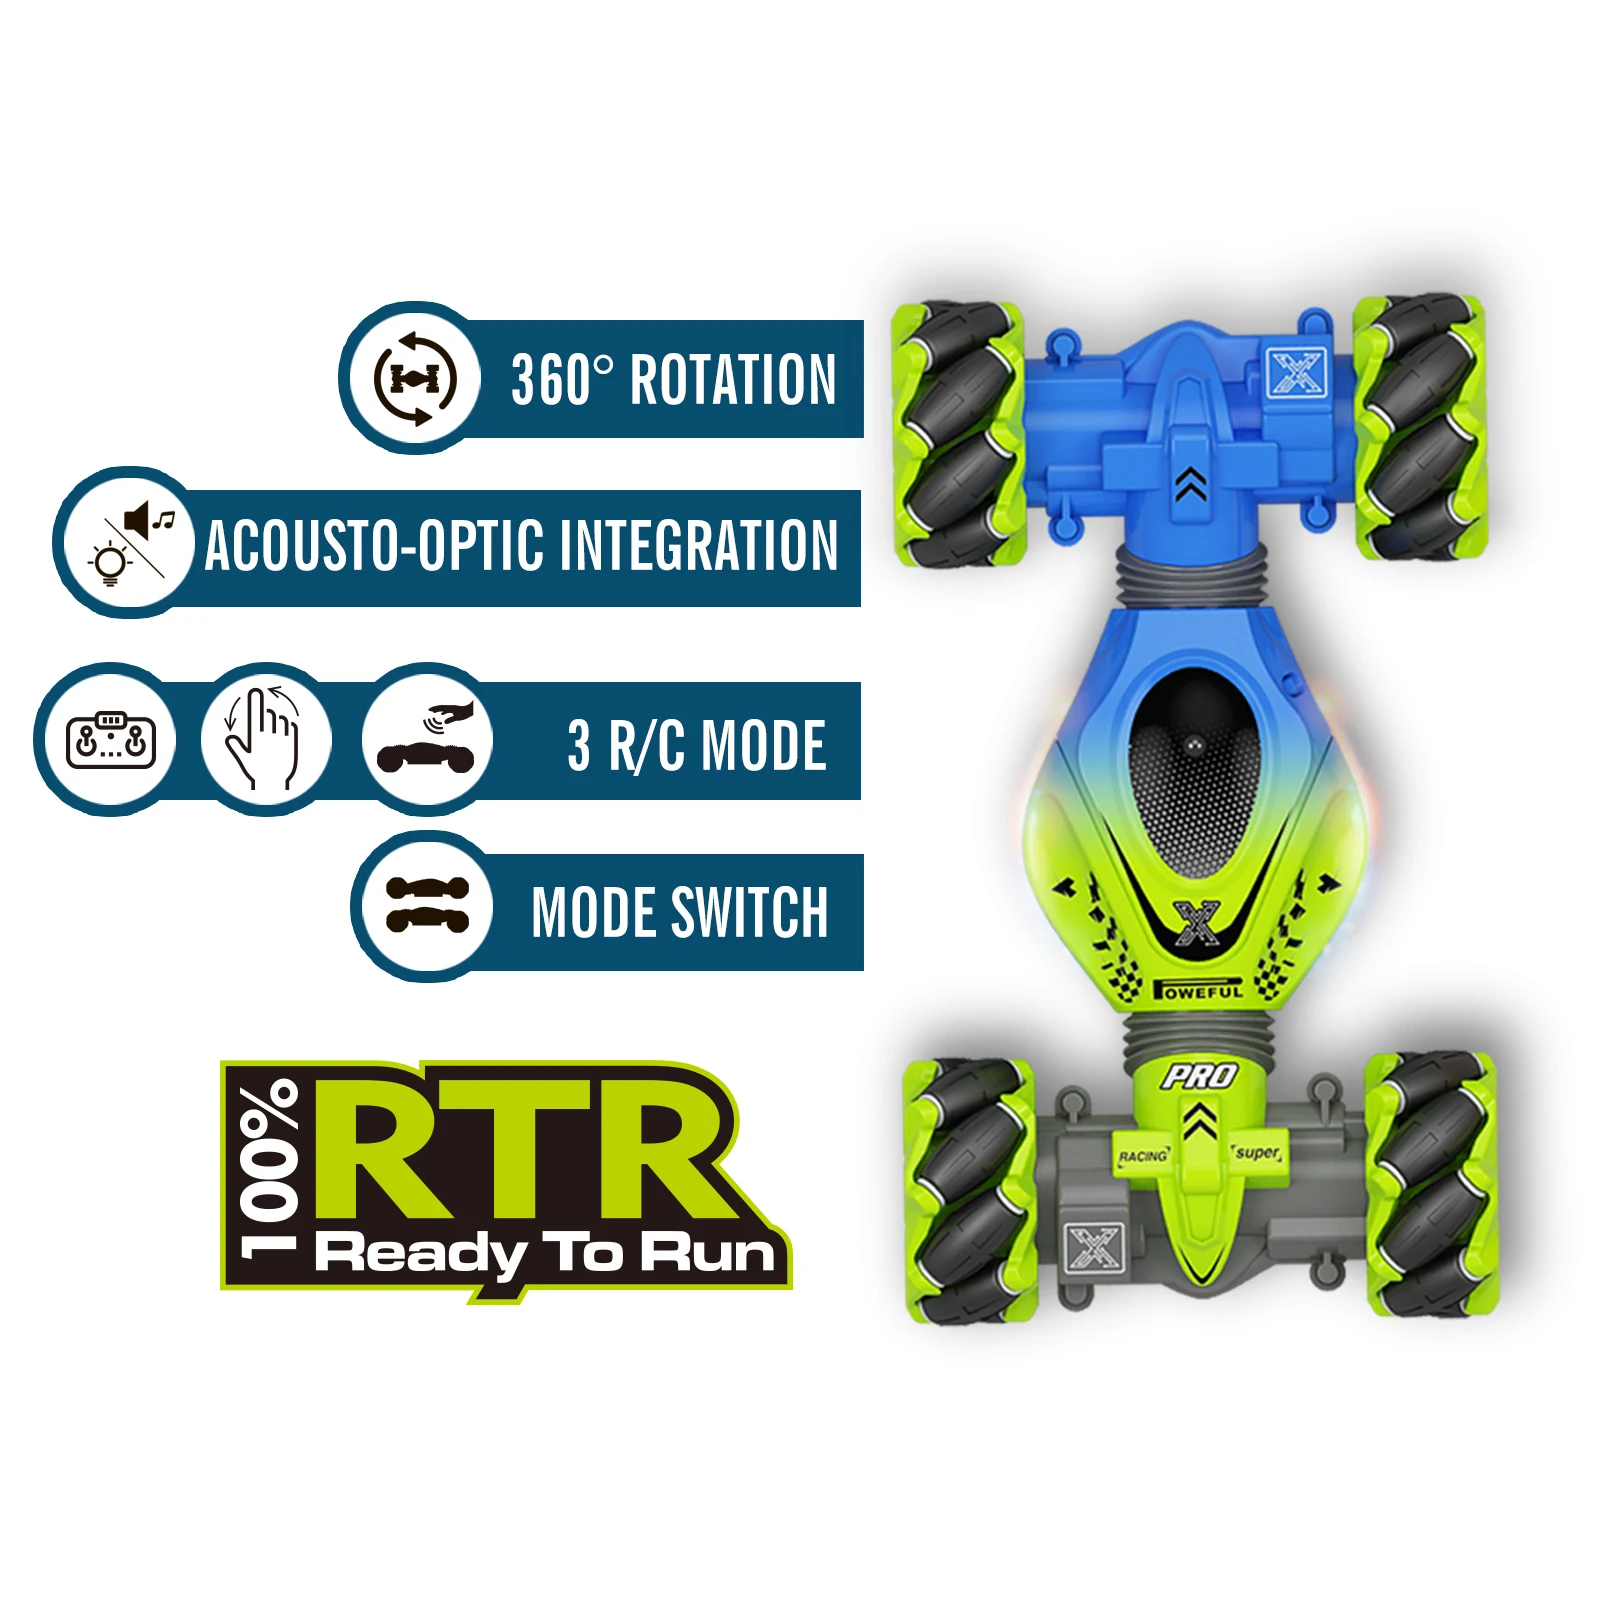 2021 New Mini Stunt Car RC Toys 4WD Gesture Induction Sensor Watch Control Twist Car Vehicle with LED Music Christmas Gift